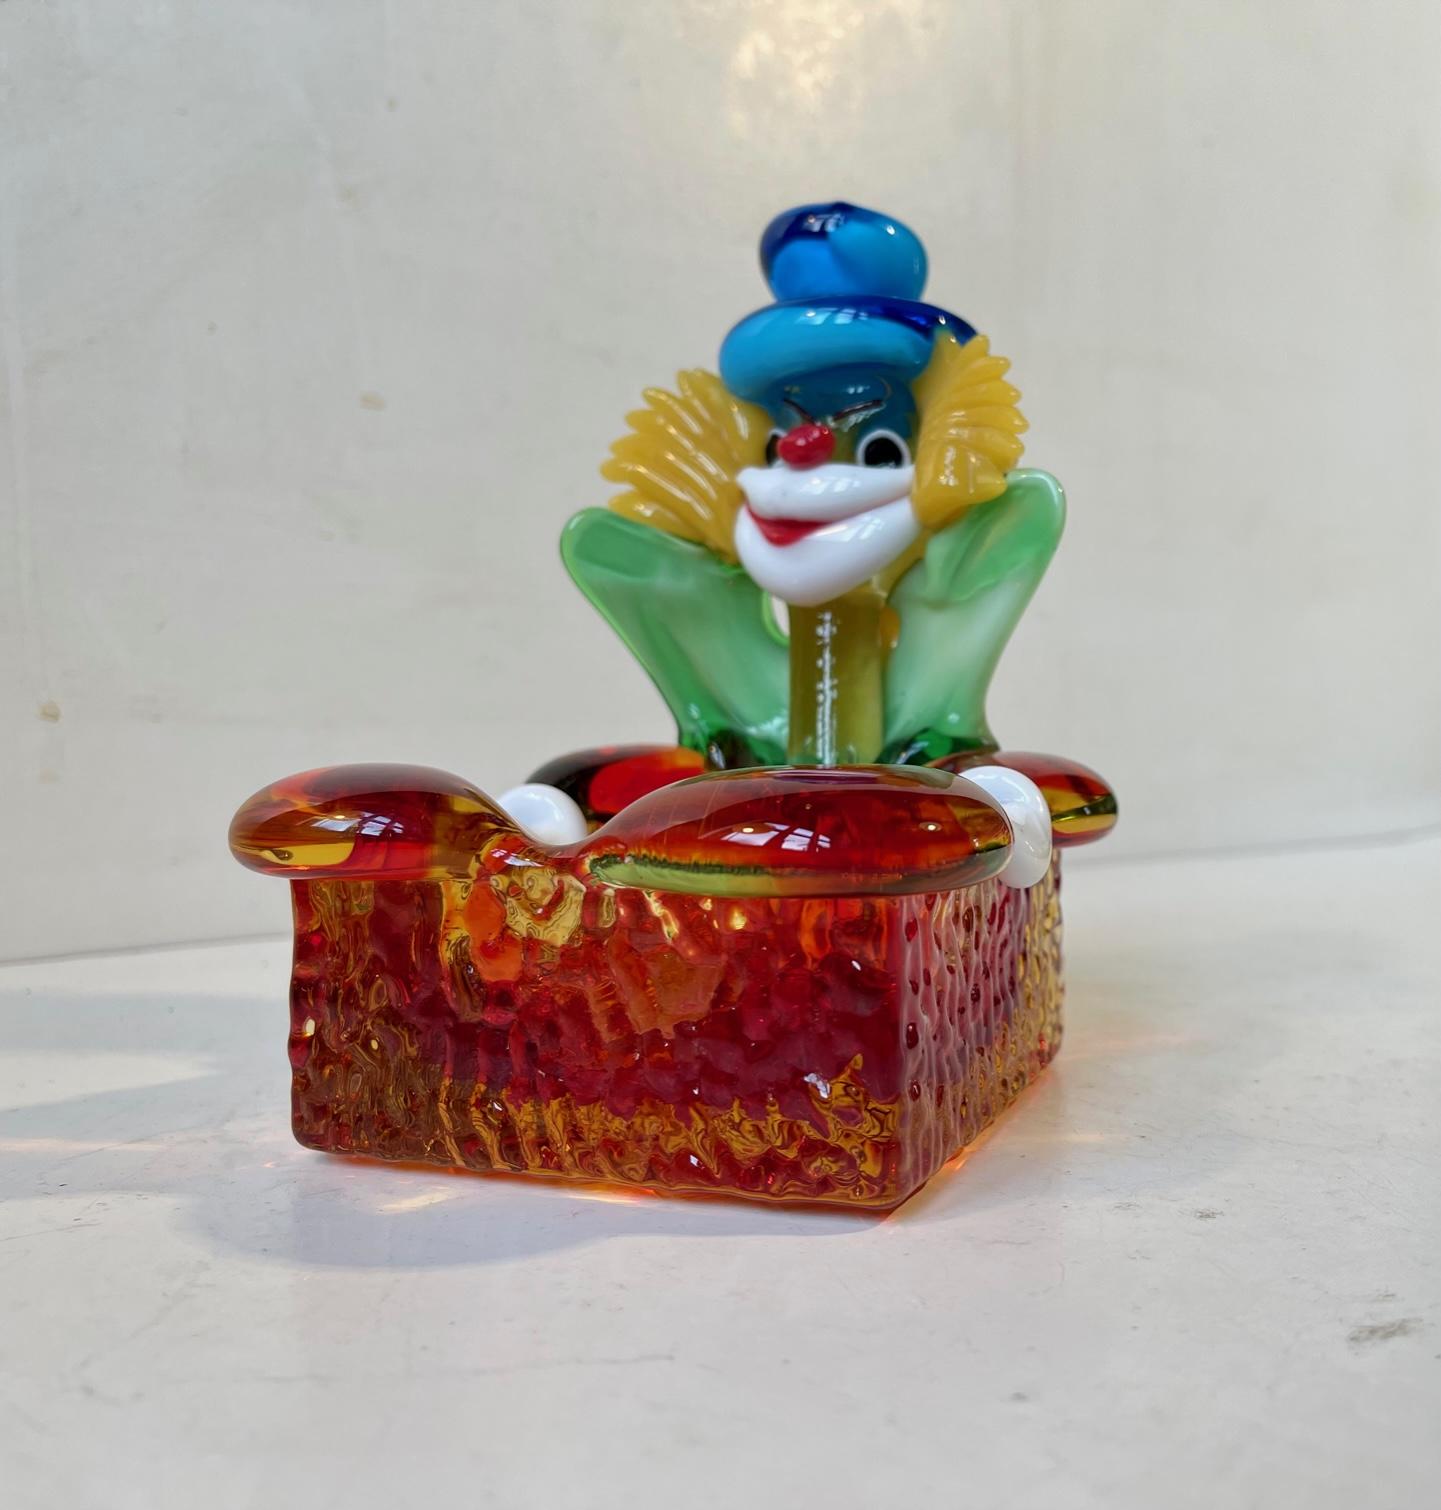 Colorful Murano ashtray in shape of a clown. Hand-made in Murano Italy during the 1970s, probably by Vetri. Measurements: H: 15 cm, W: 11 cm, Dept: 11 cm.